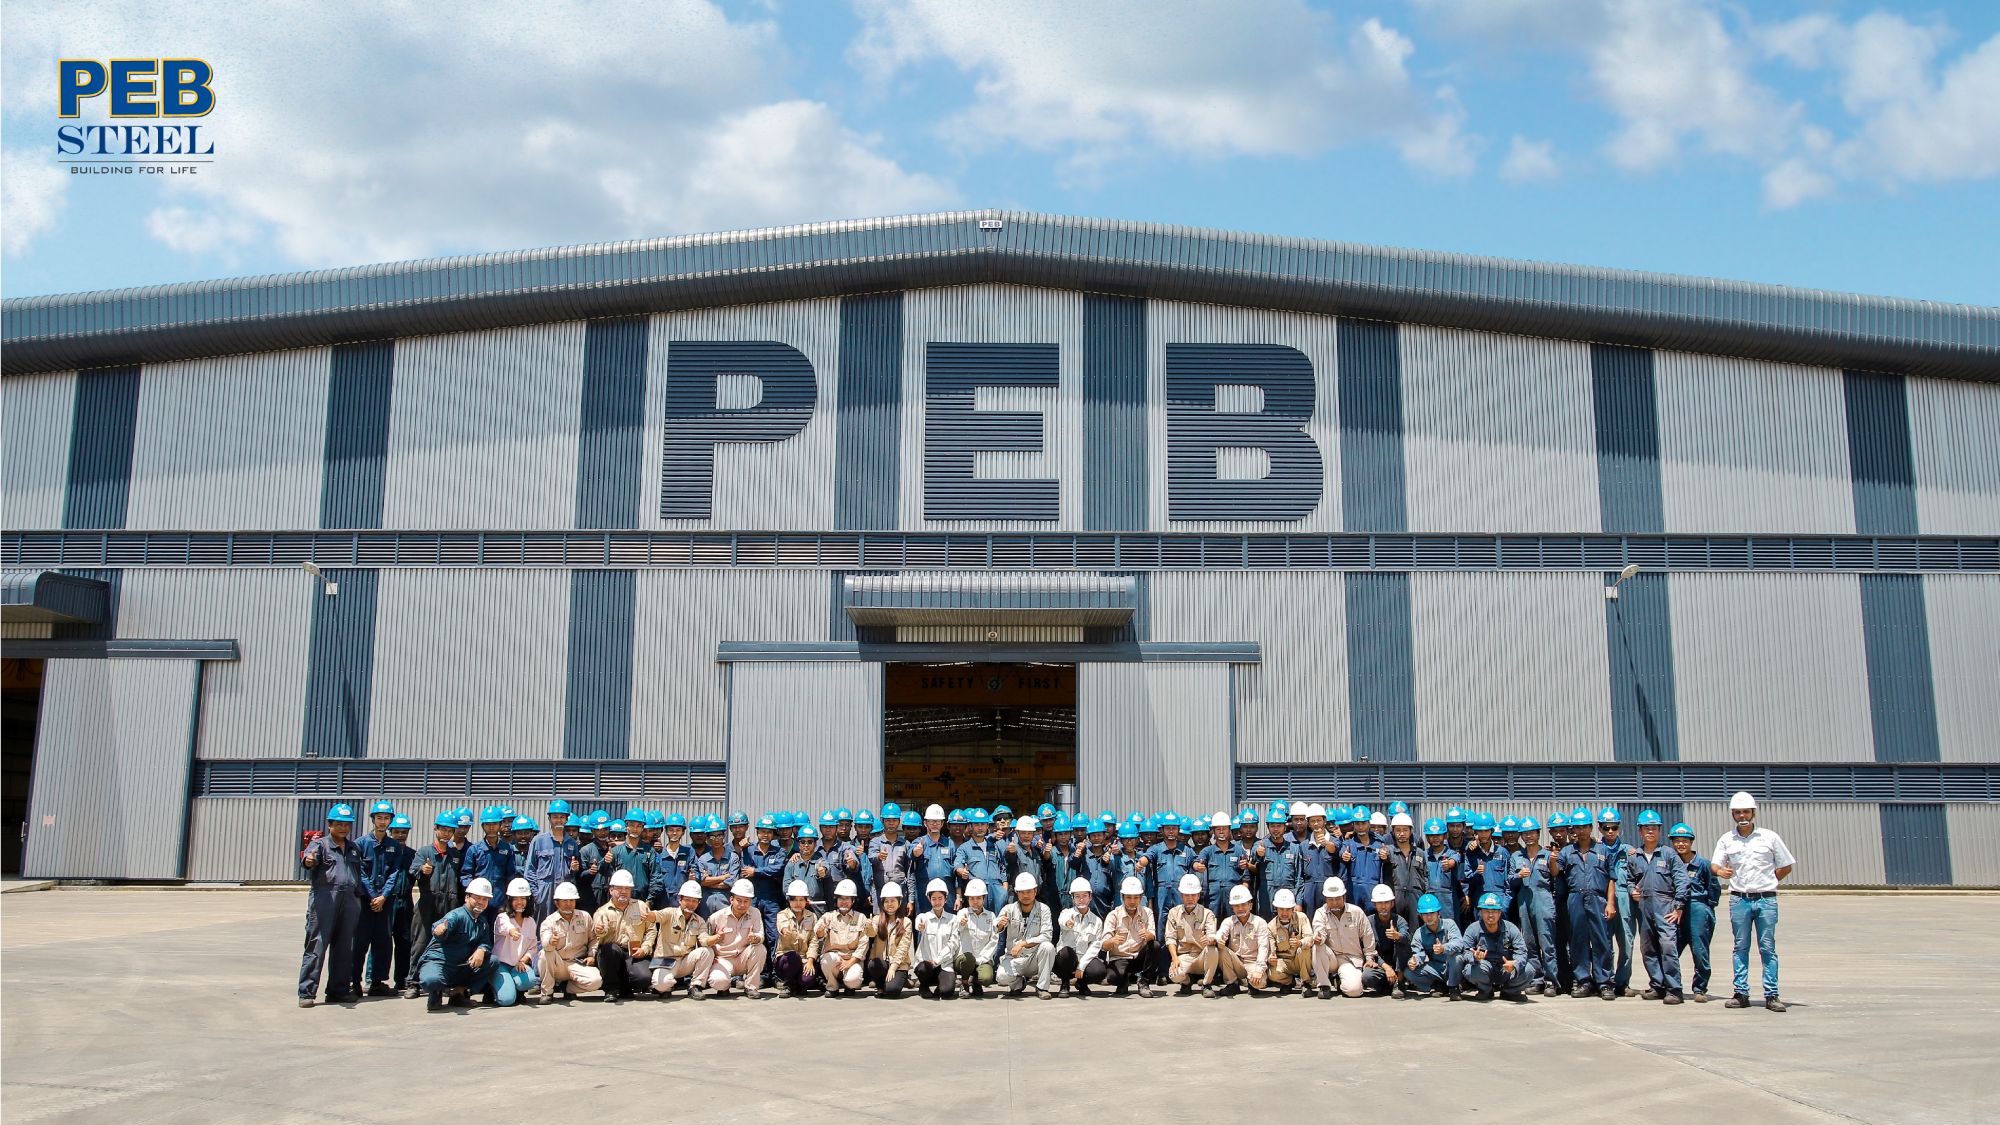 Pebsteel has +1500 experienced employees and in-house engineers to ensure the best quality